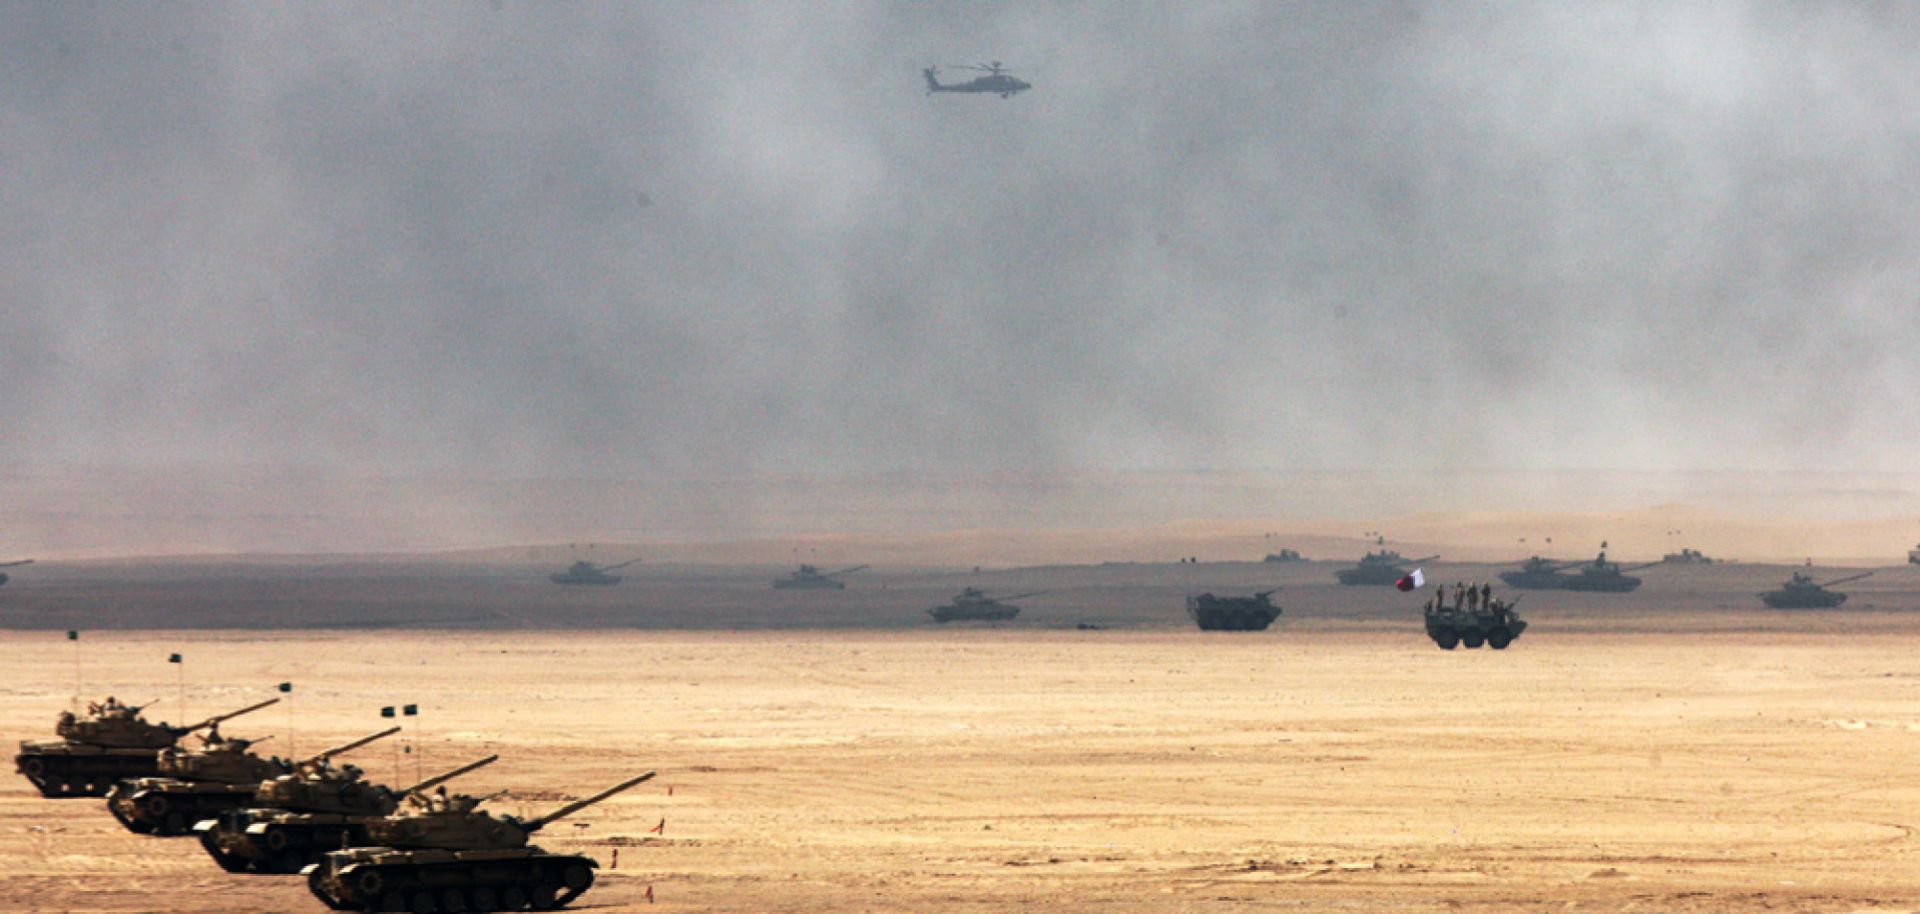 Tanks participate in a joint Gulf Cooperation Council military exercise north of Kuwait City.